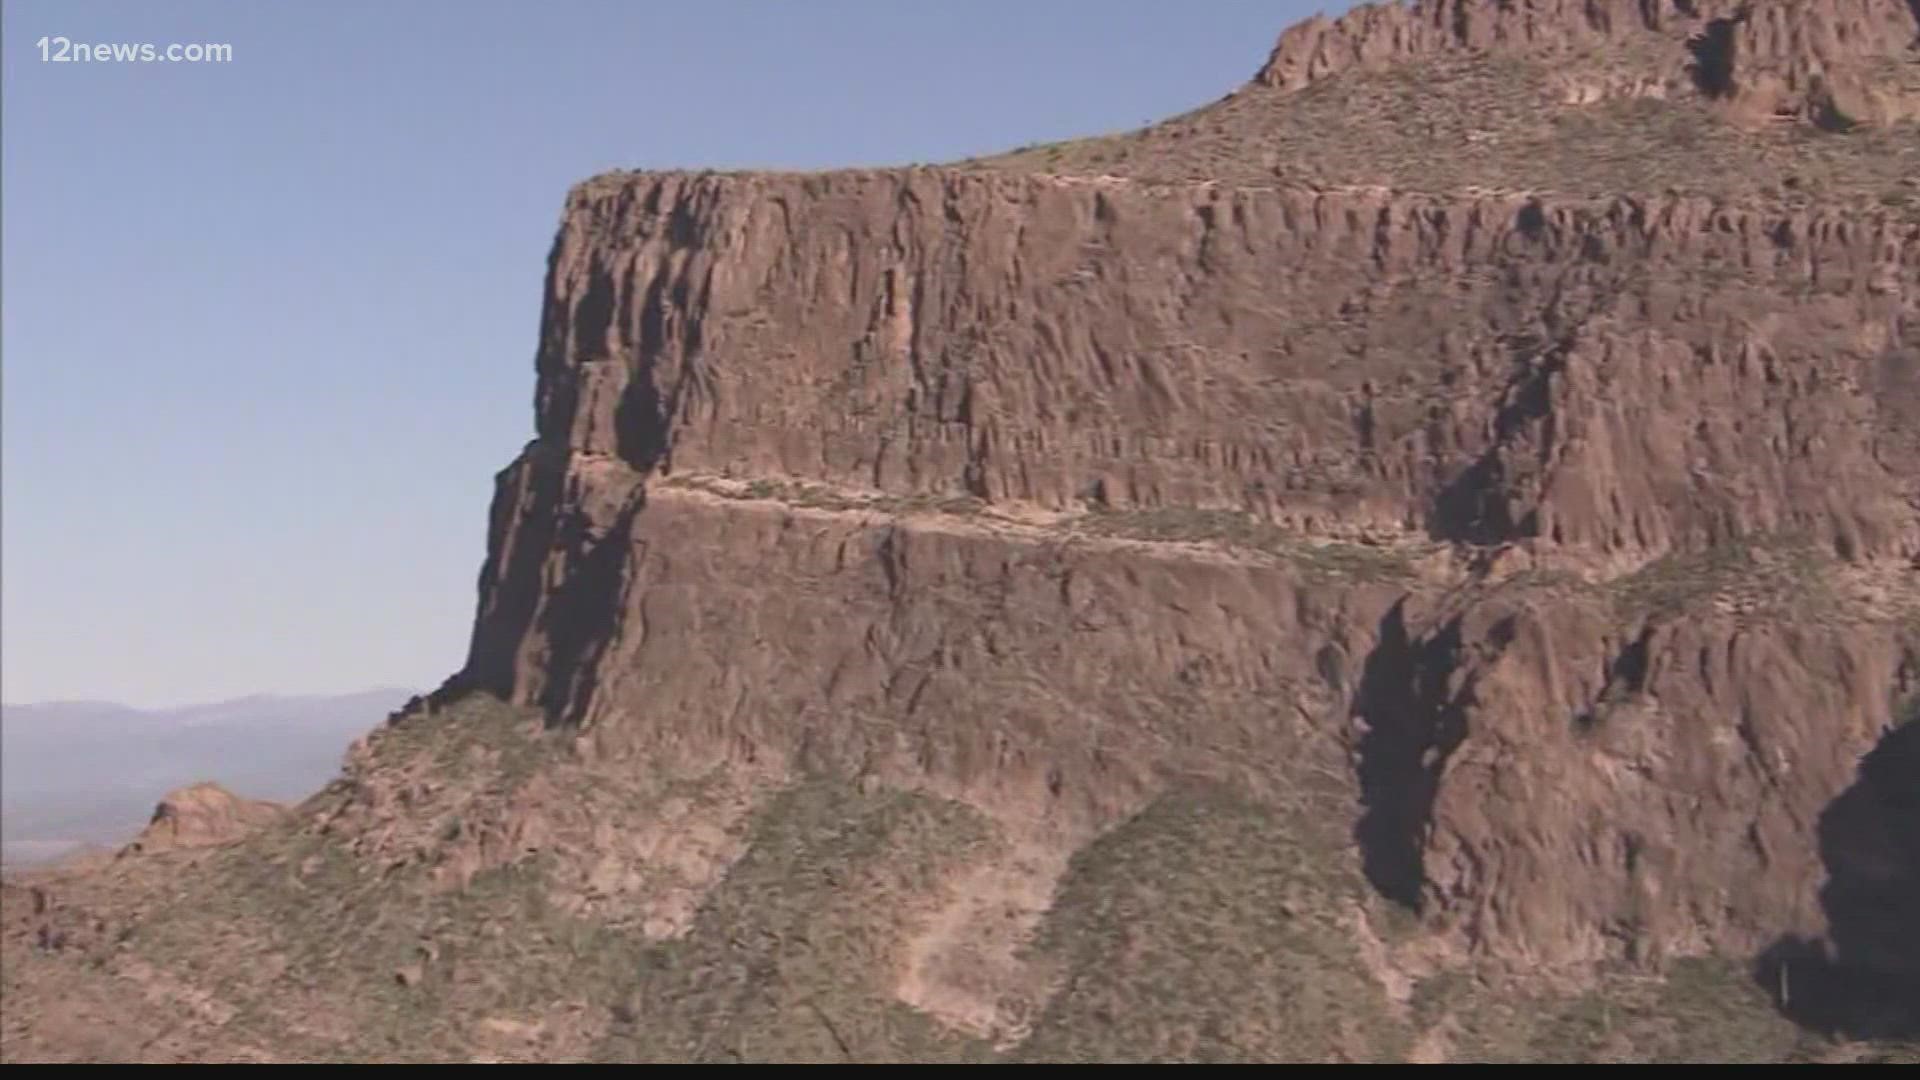 The Pinal County Sheriff's Office responded after a friend of a 21-year-old hiker called 911 saying the man had slipped while taking a photo.